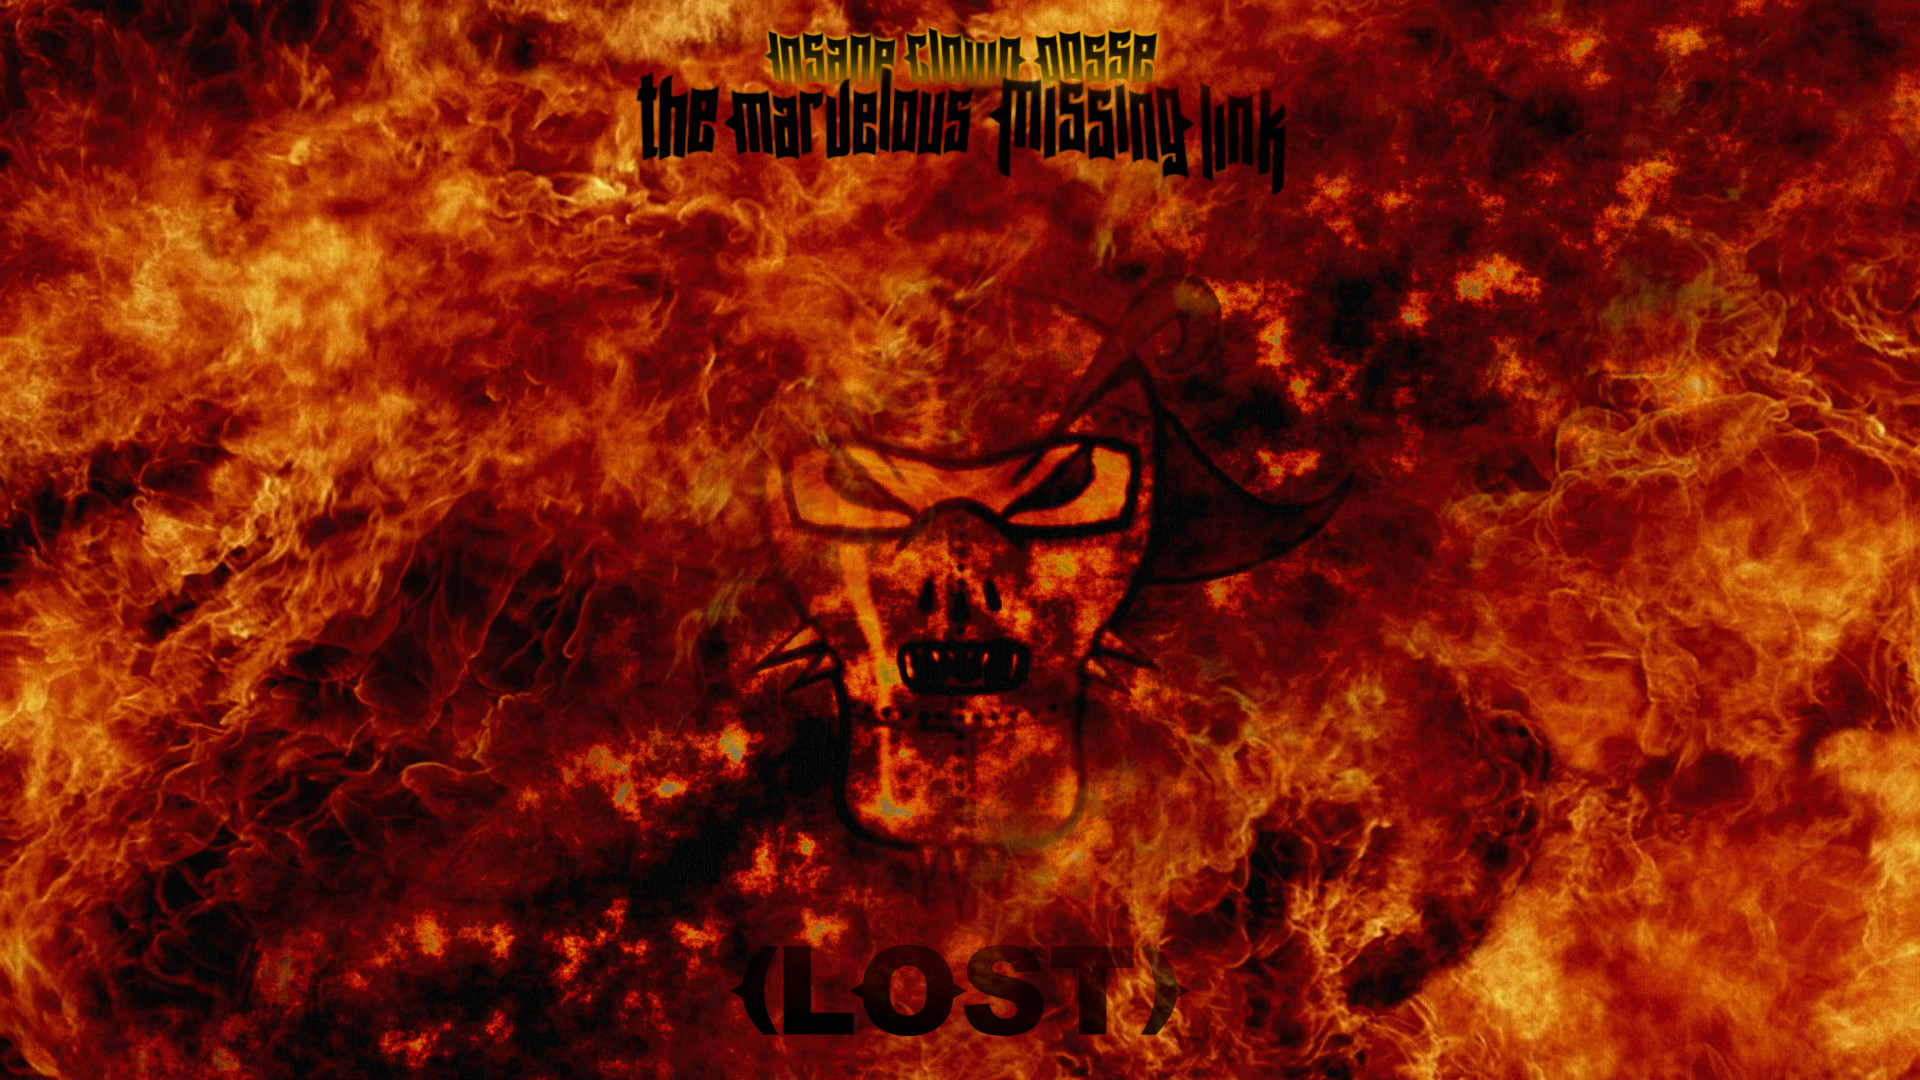 1920x1080 [Wallpaper Contest] The Marvelous Missing Link (LOST) - Hell WallpaperContestSubmission  ...